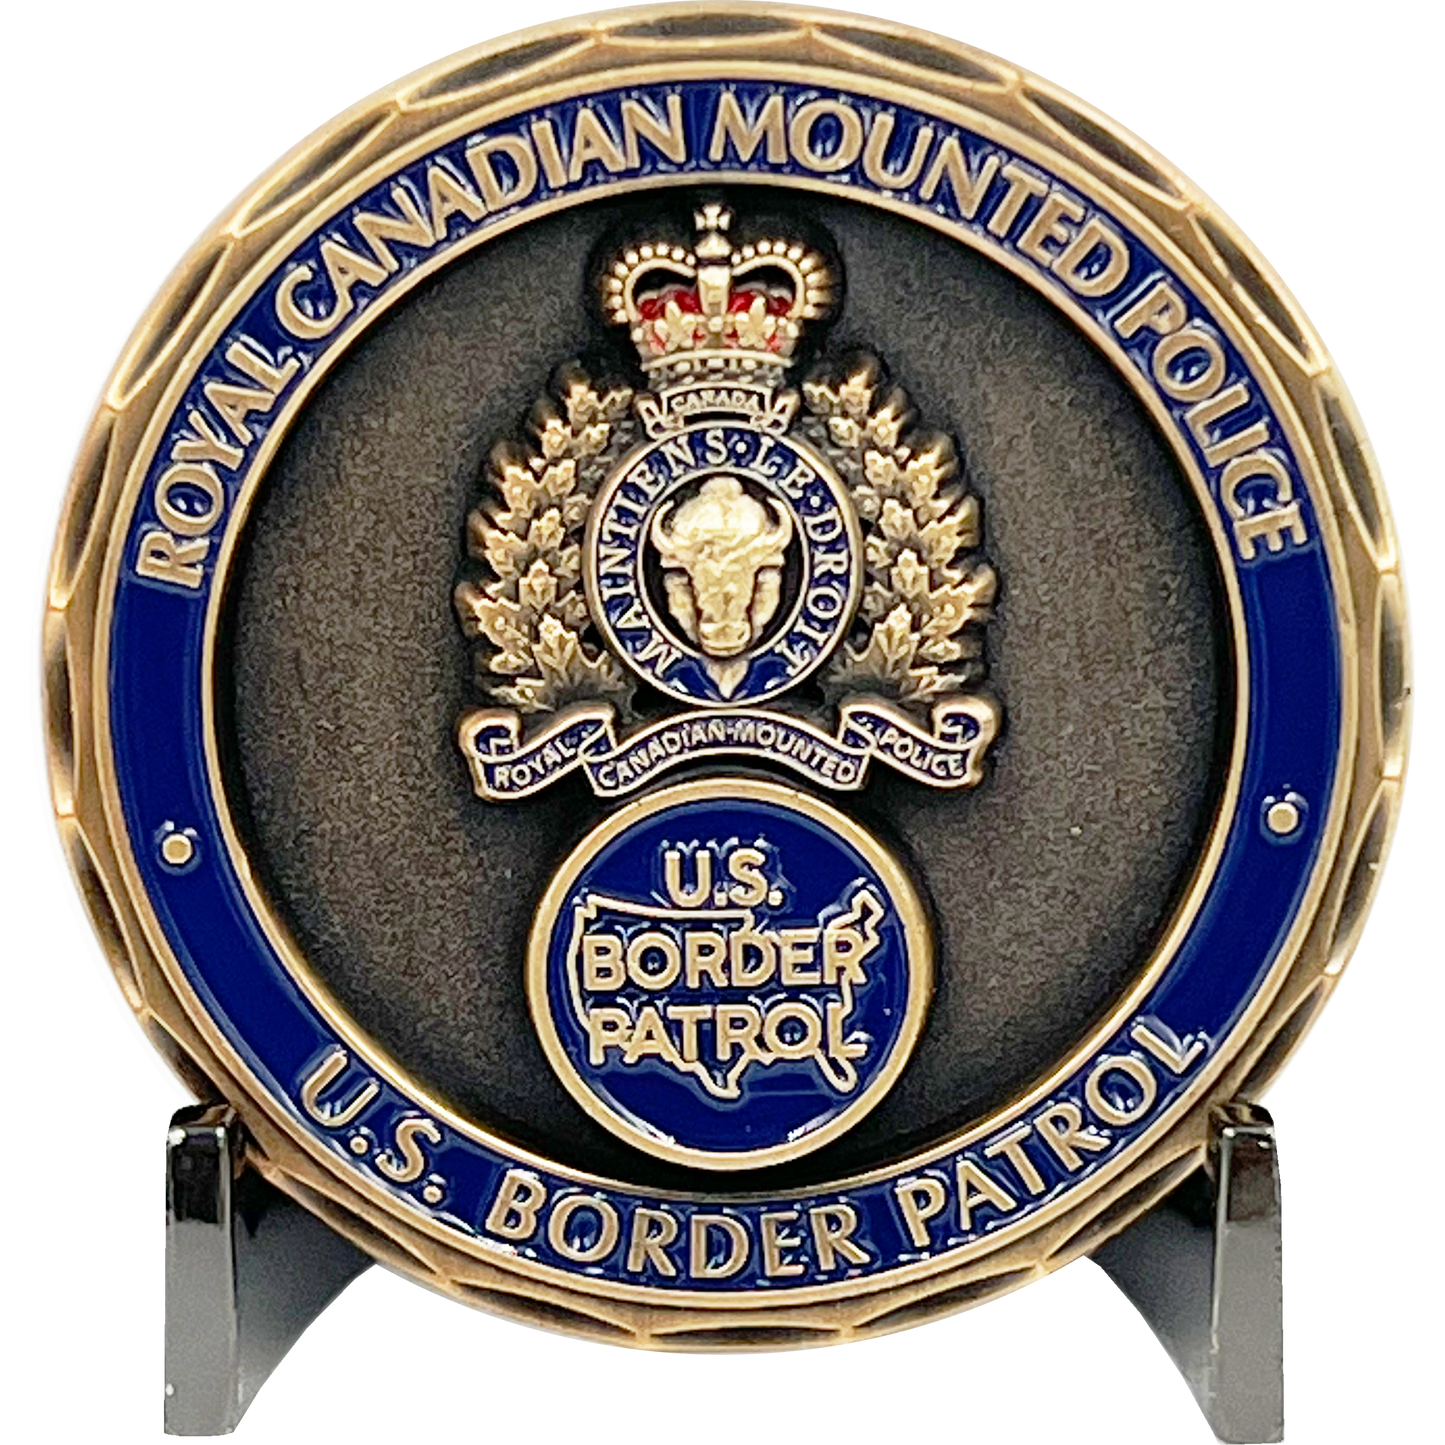 BL4-021 RCMP Challenge Coin Royal Canadian Mounted Police CBP Border Patrol Agent Canada CBSA